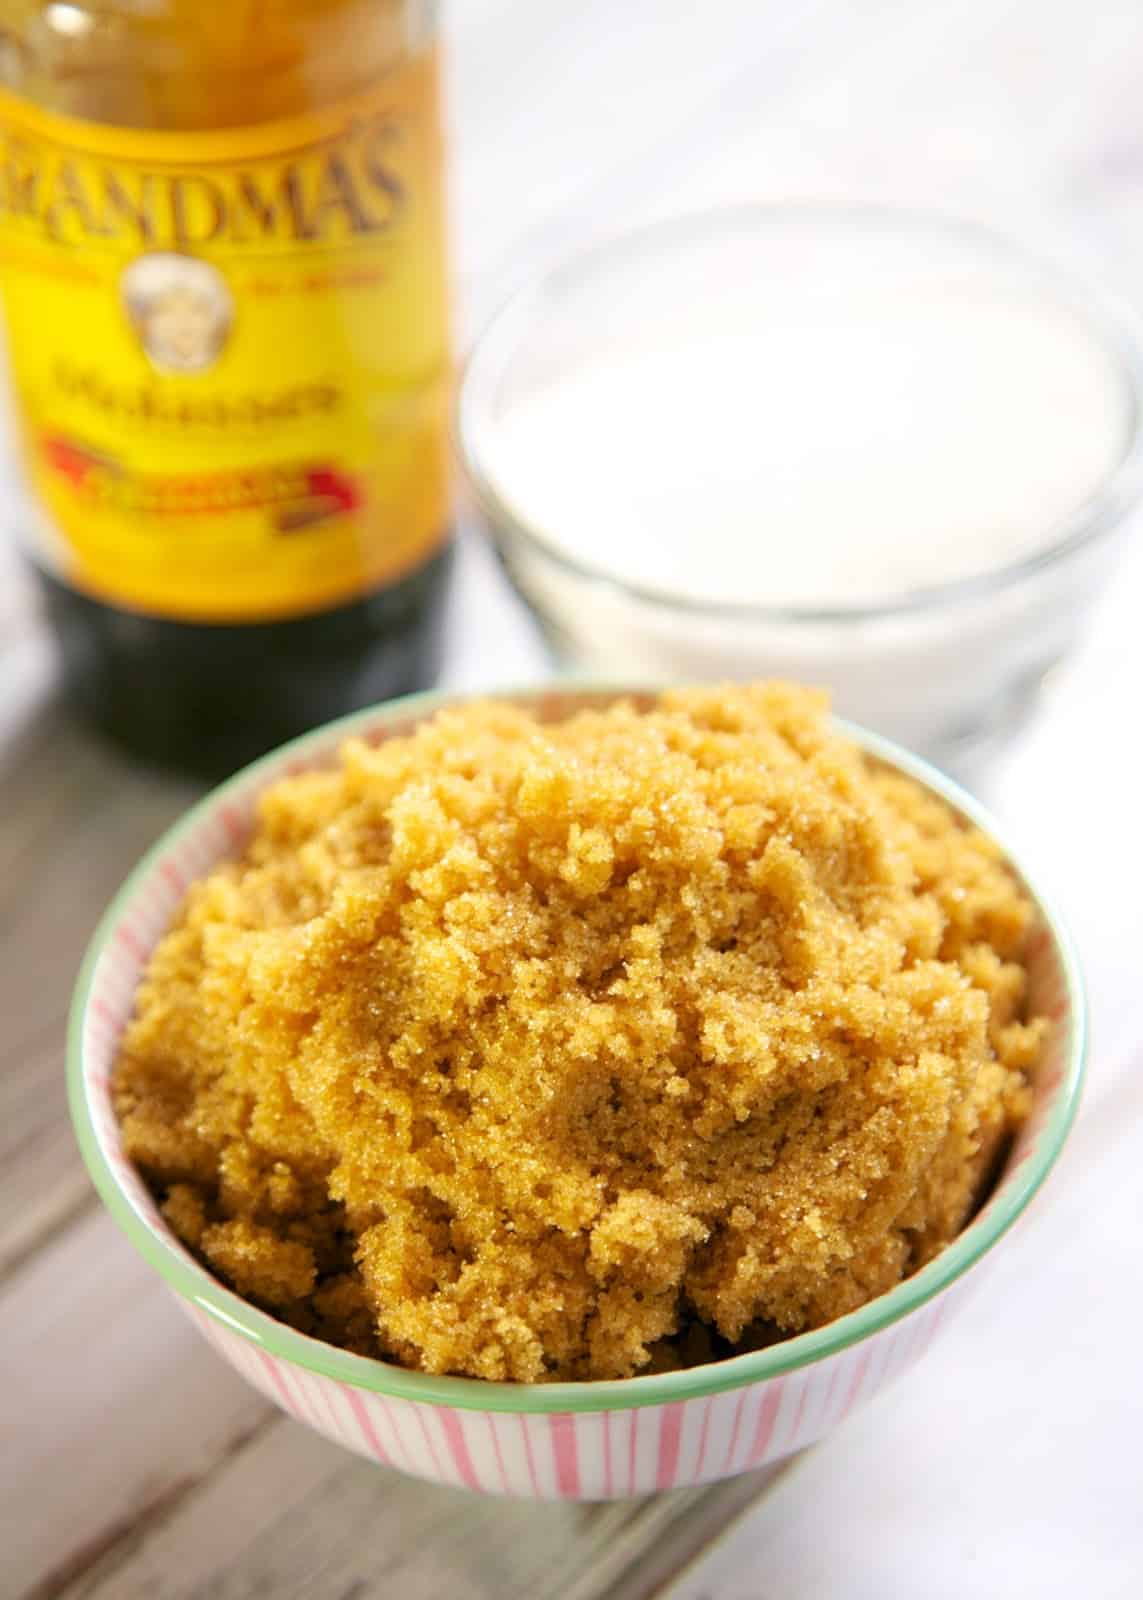 Homemade Brown Sugar - never run out of brown sugar again! Make your own with only 2 simple ingredients! I ran out of brown sugar while making cookies - used this recipe and it was perfect!